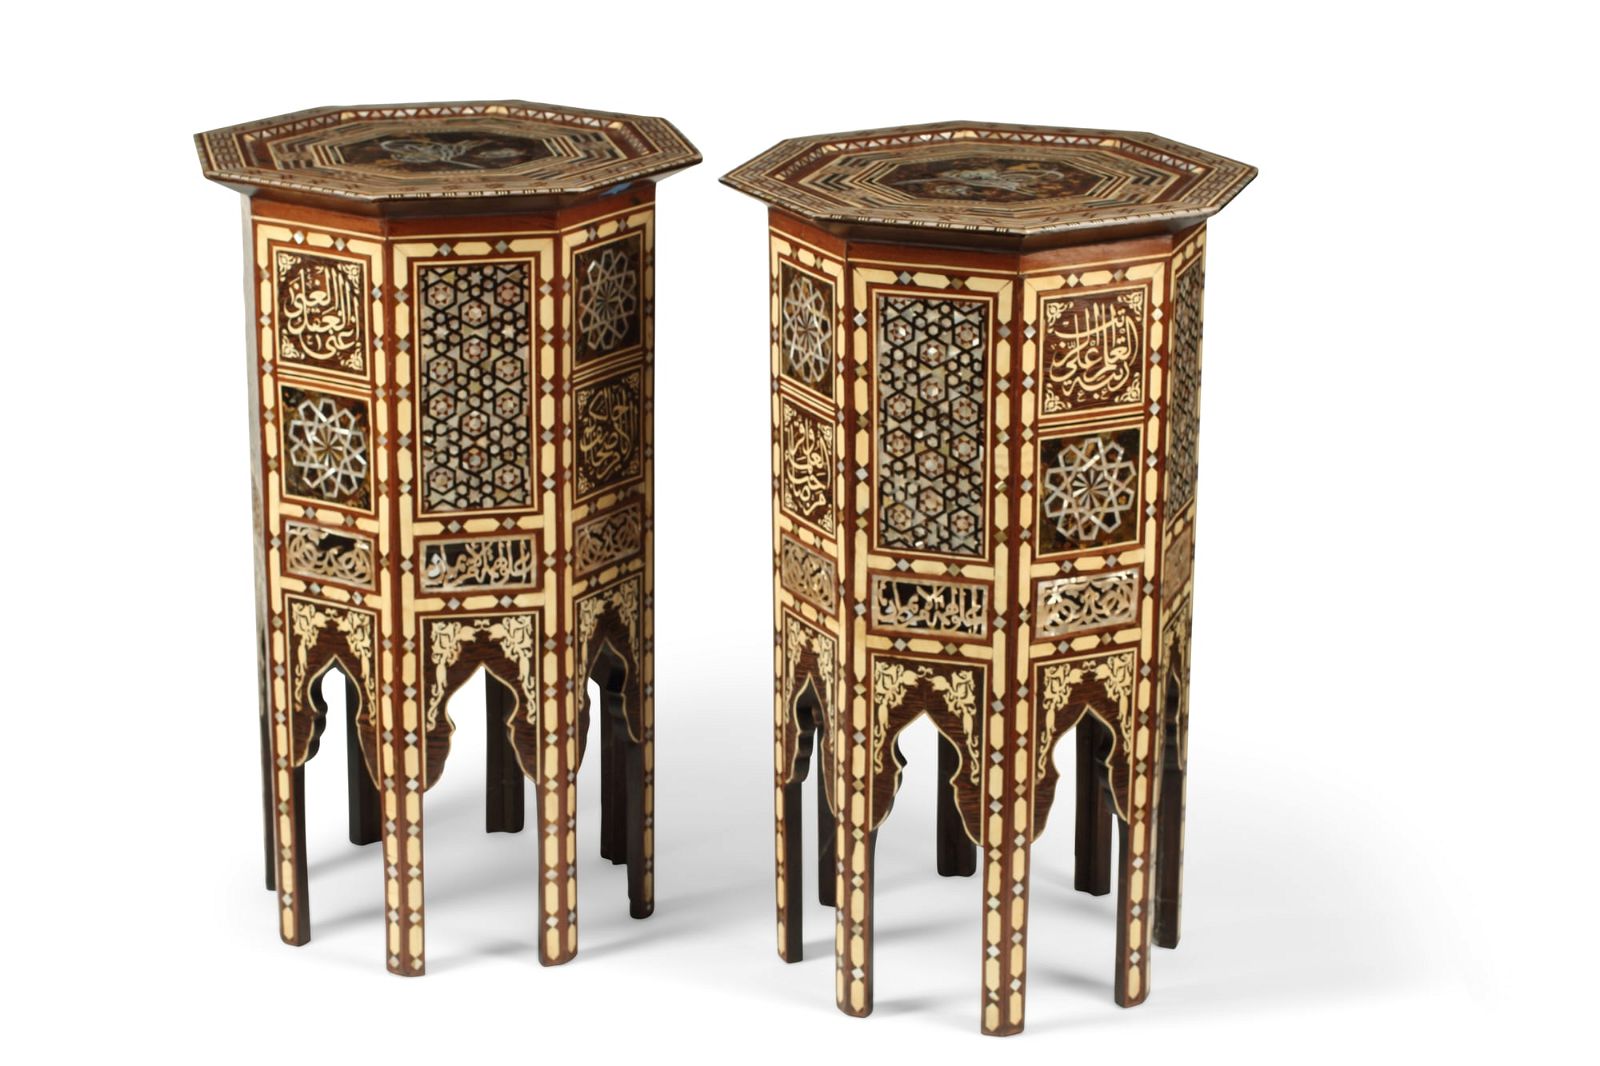 A PAIR OF LEVANTINE SHELL INLAID